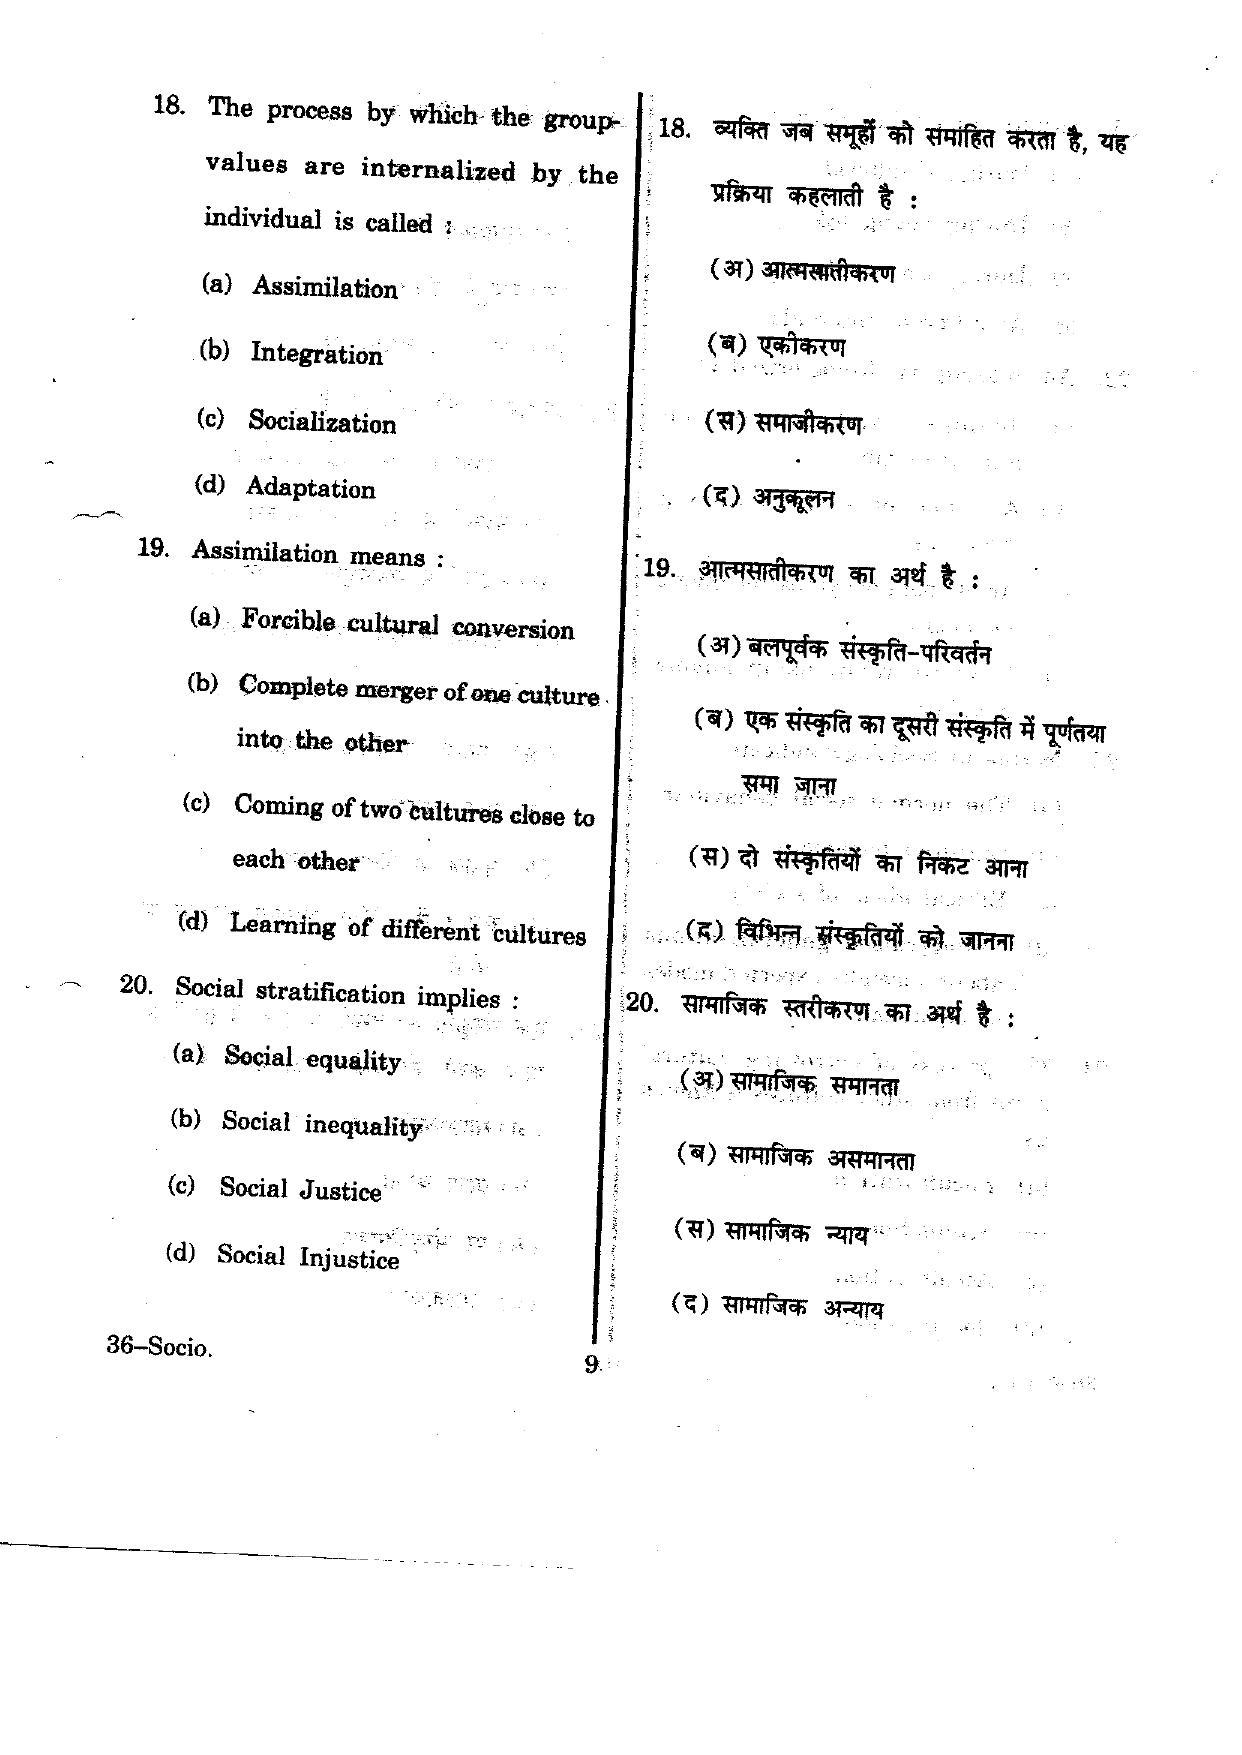 URATPG Sociology 2012 Question Paper - Page 9